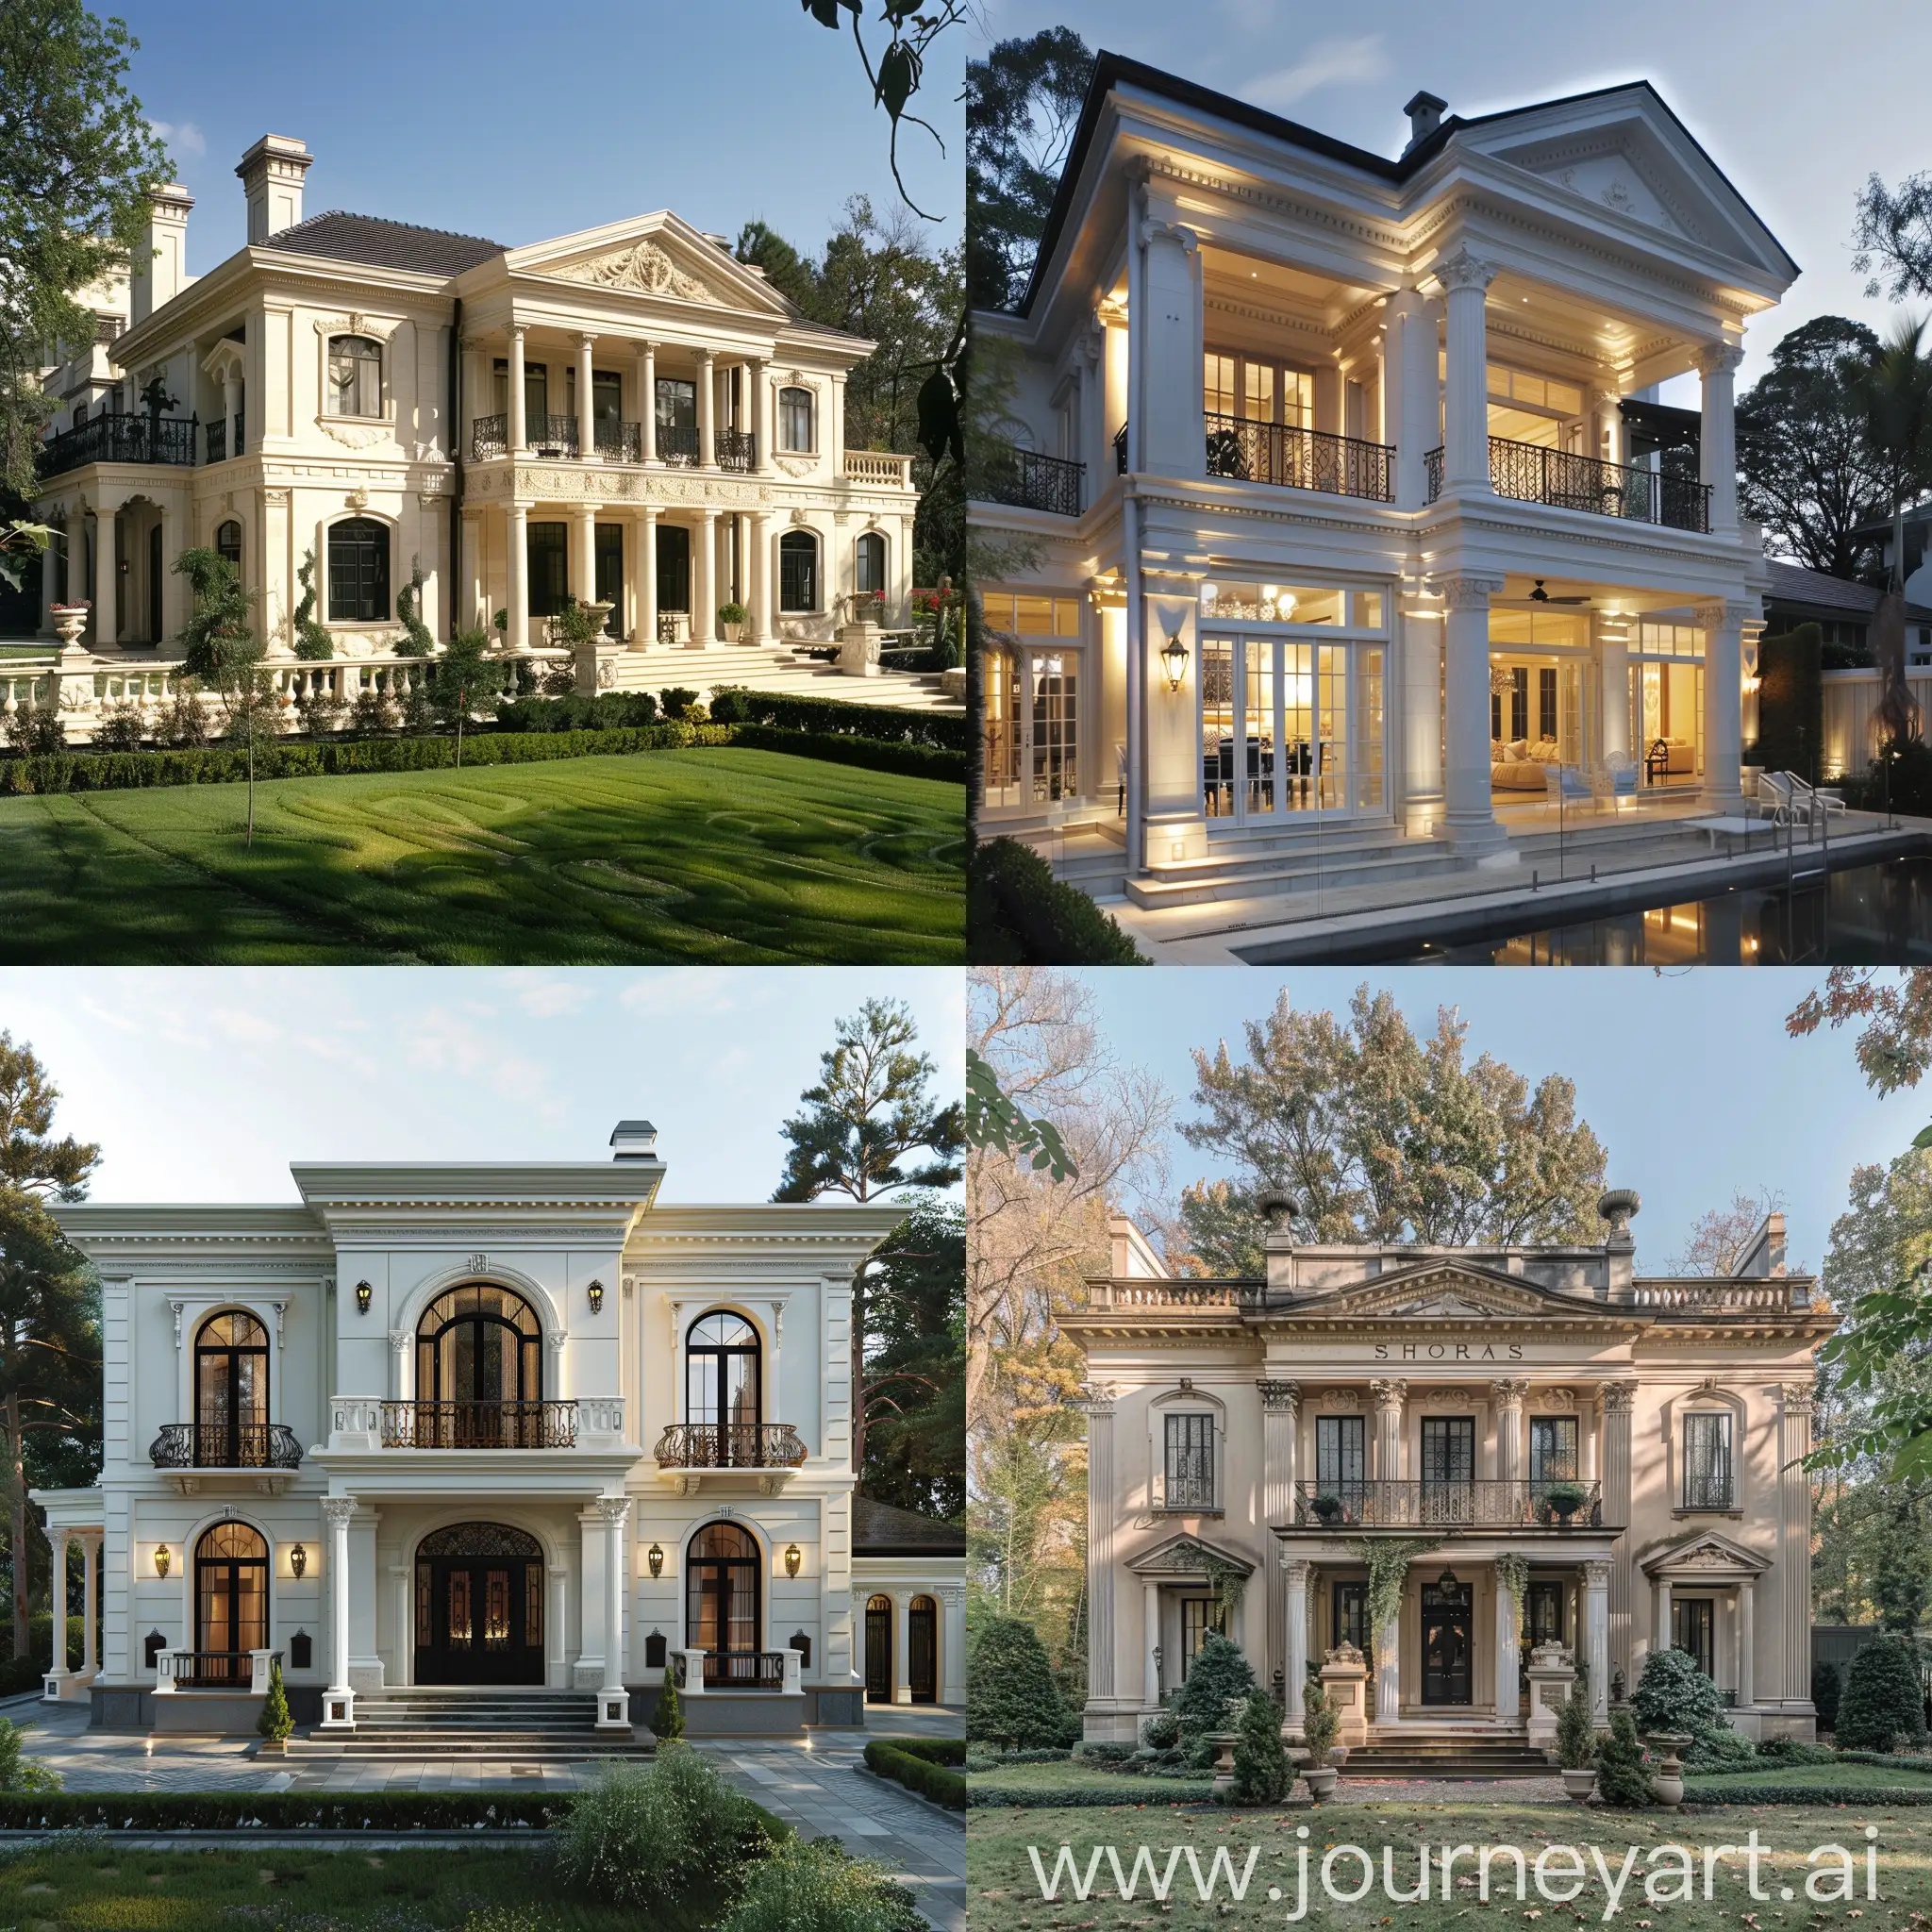 Elegant-Neoclassical-Architecture-with-Grand-Entrance-and-Ornate-Columns